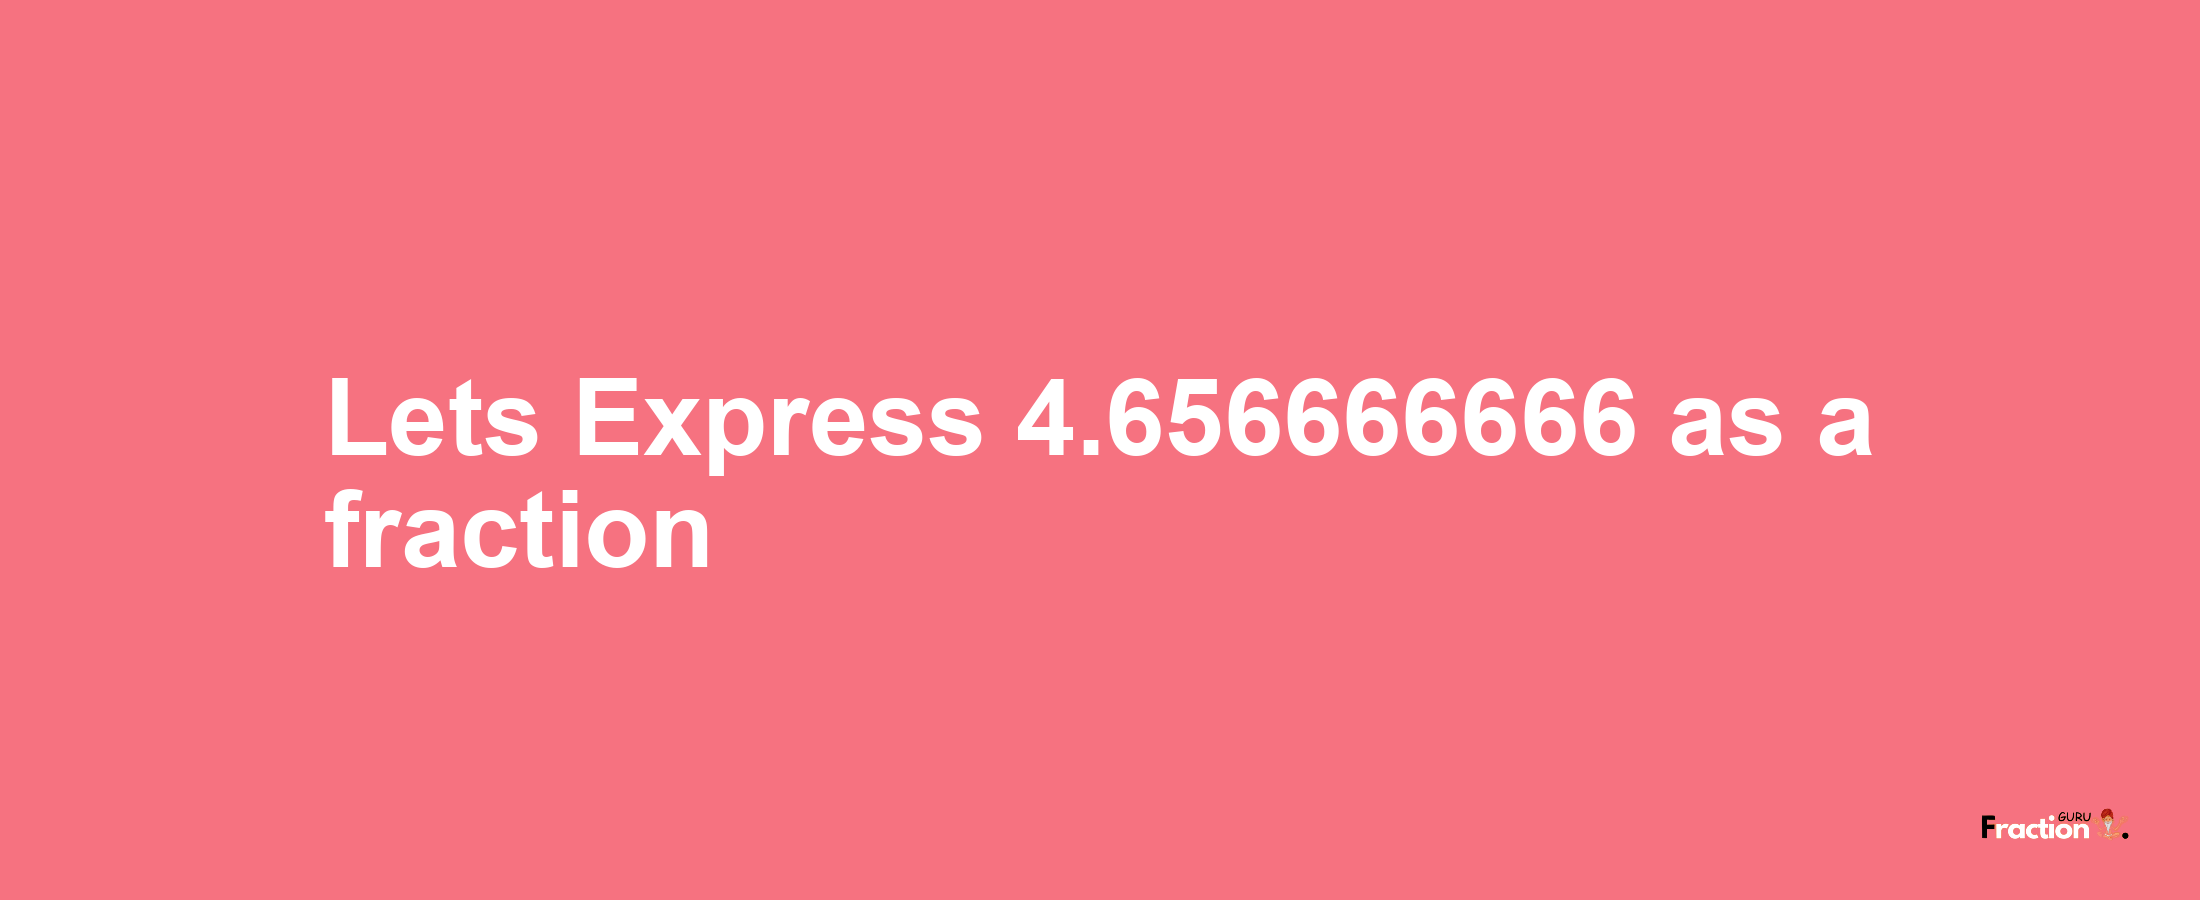 Lets Express 4.656666666 as afraction